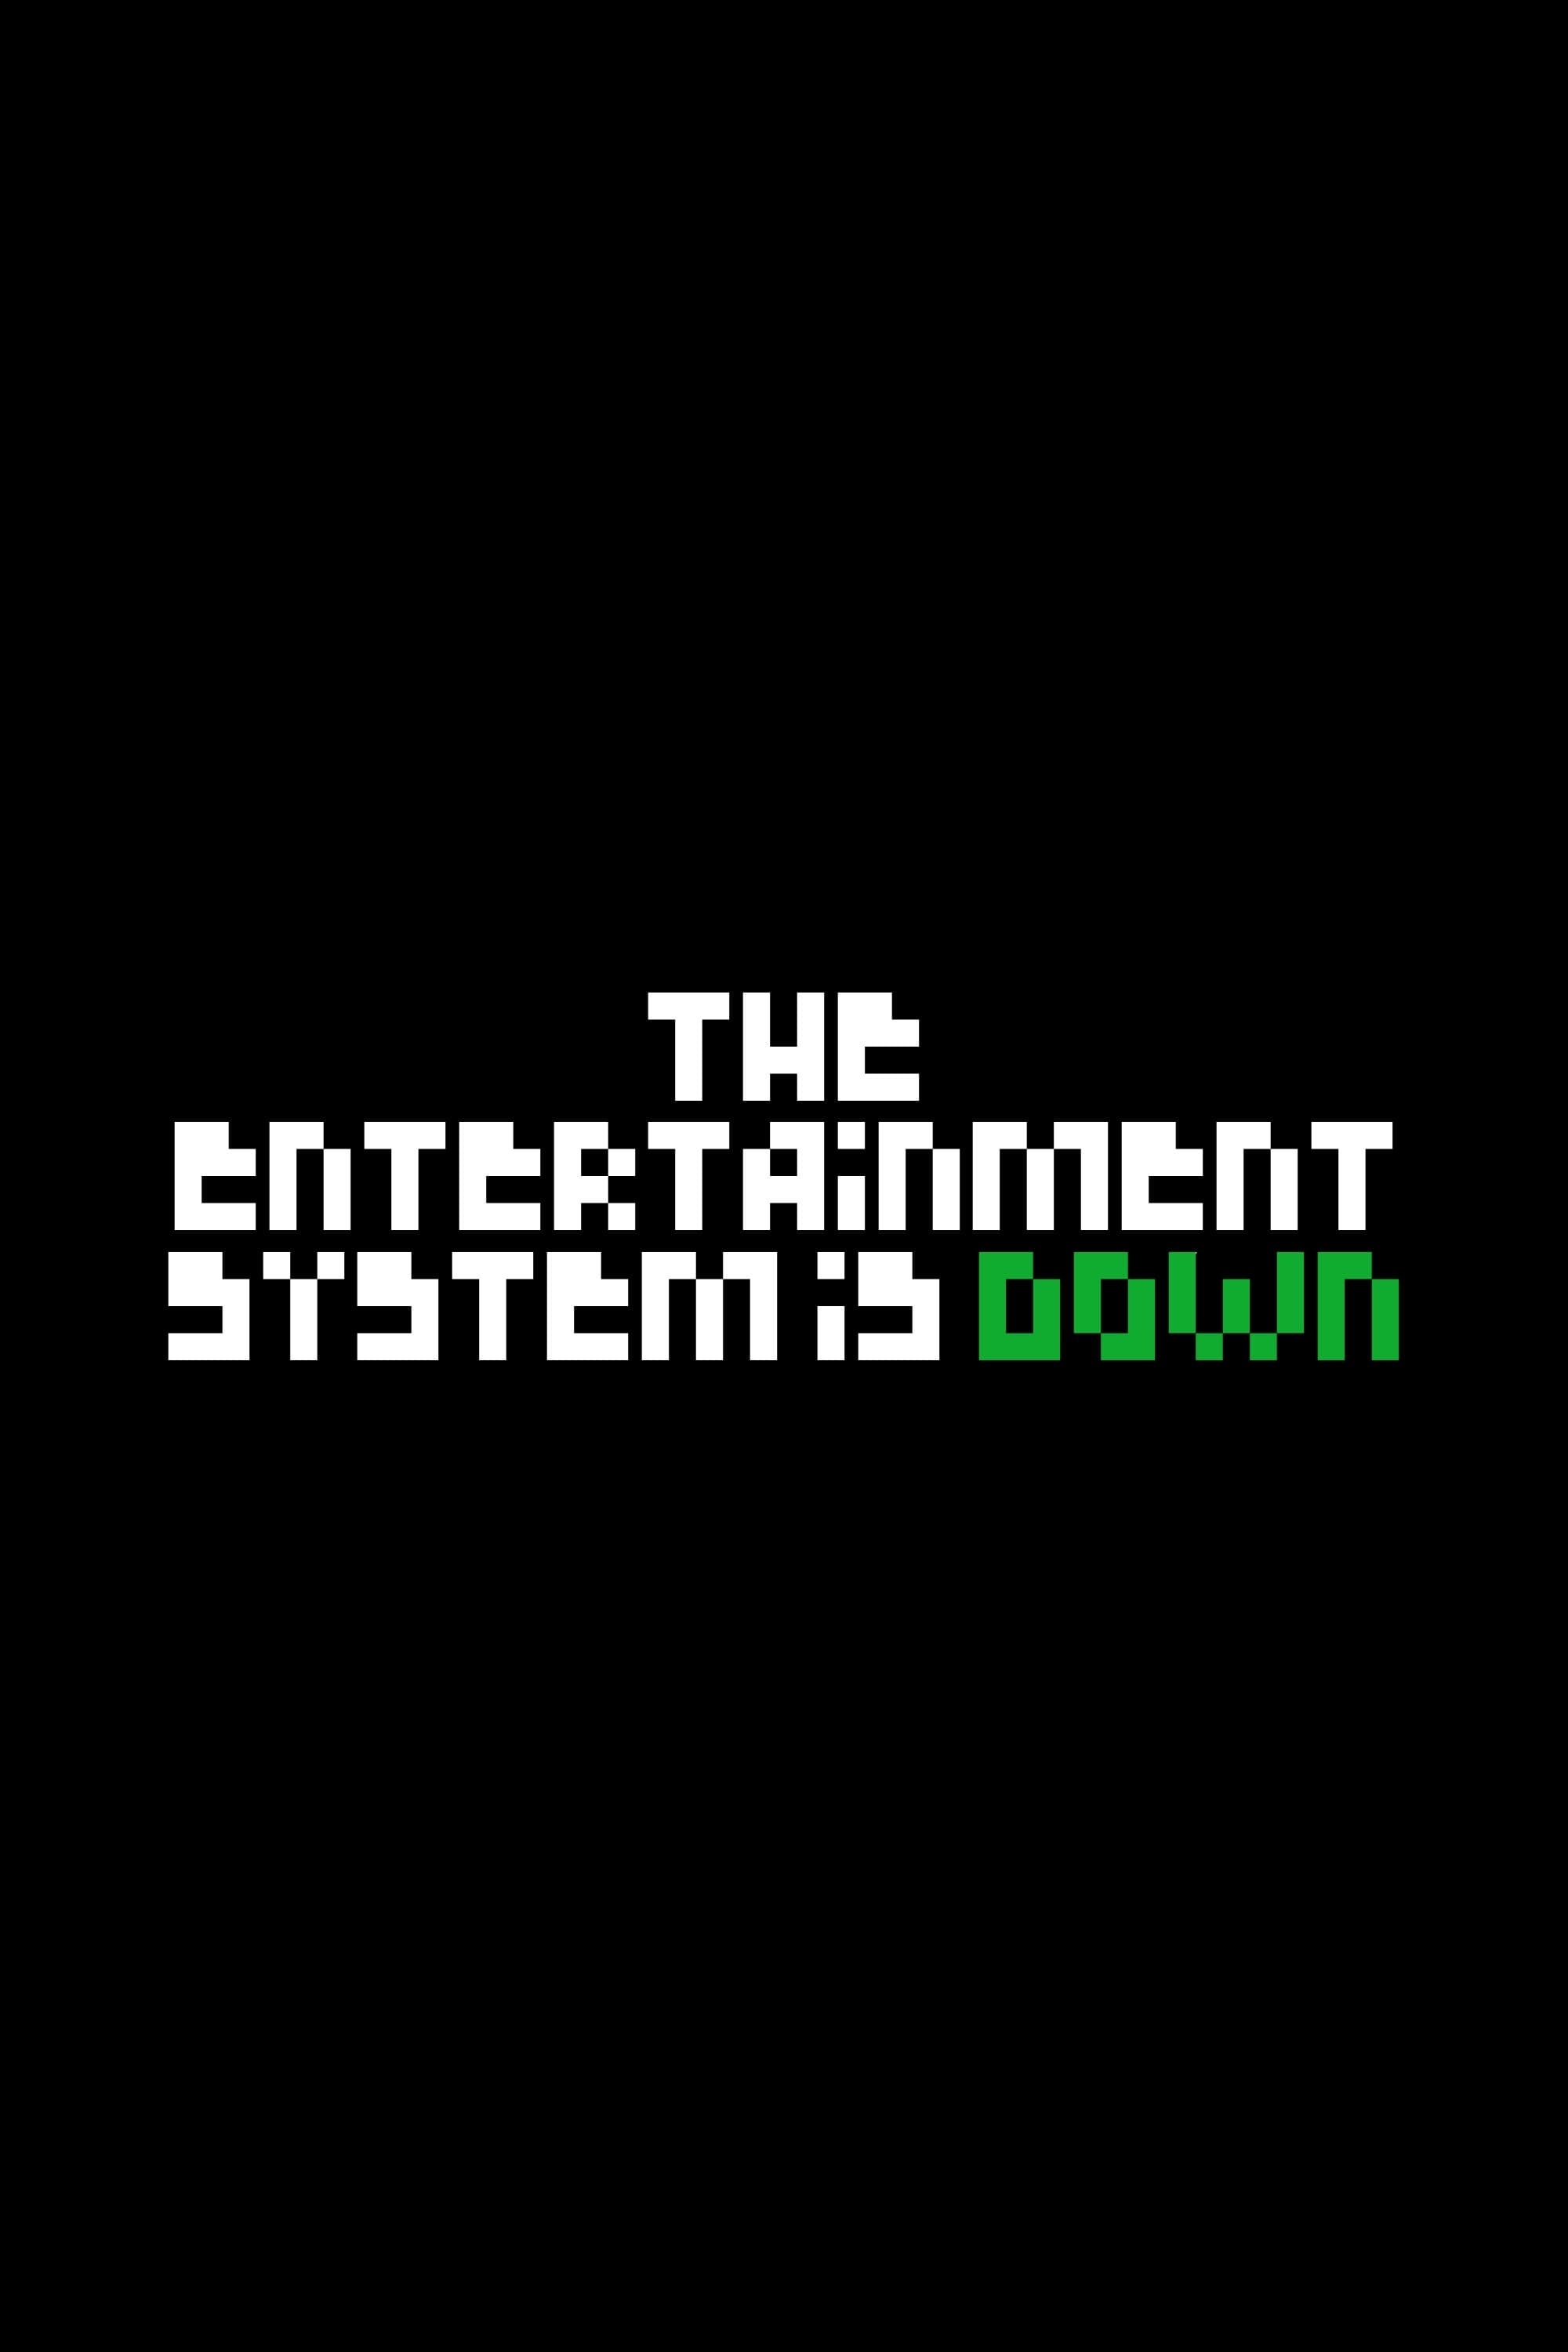 The Entertainment System Is Down